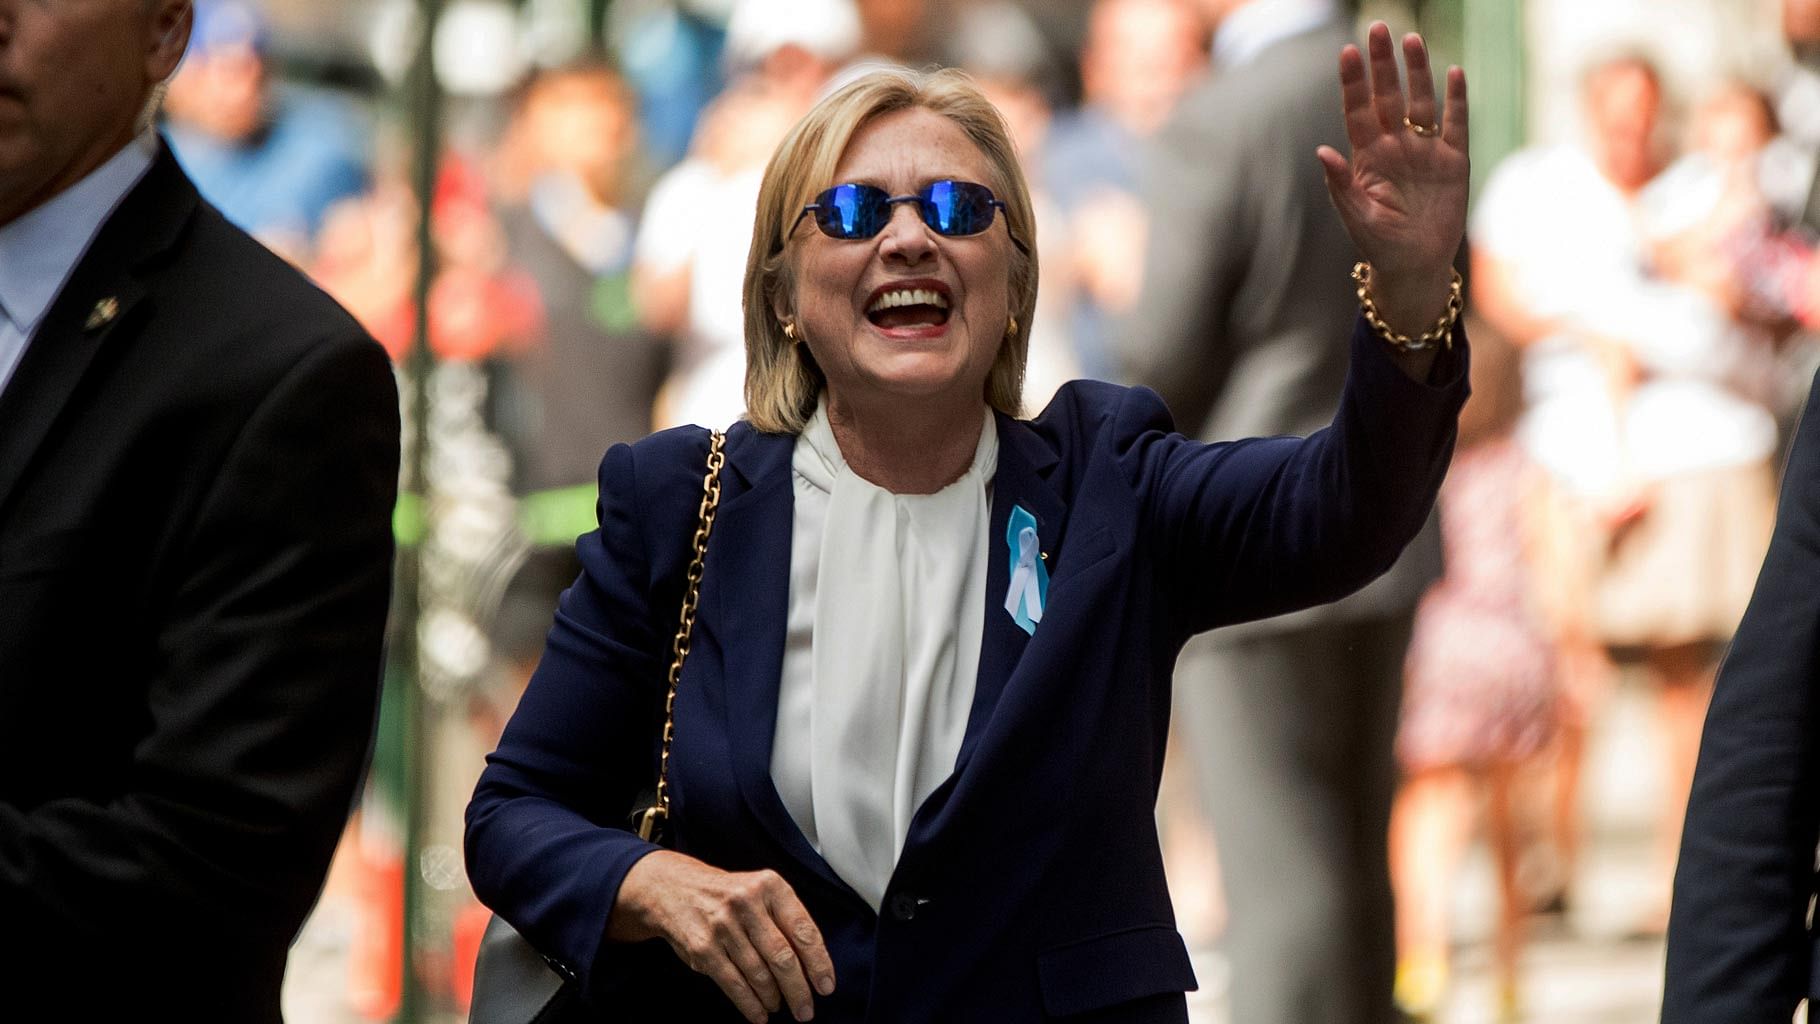 Democratic presidential candidate Hillary Clinton waves after leaving an apartment building on Sunday. (Photo: AP)